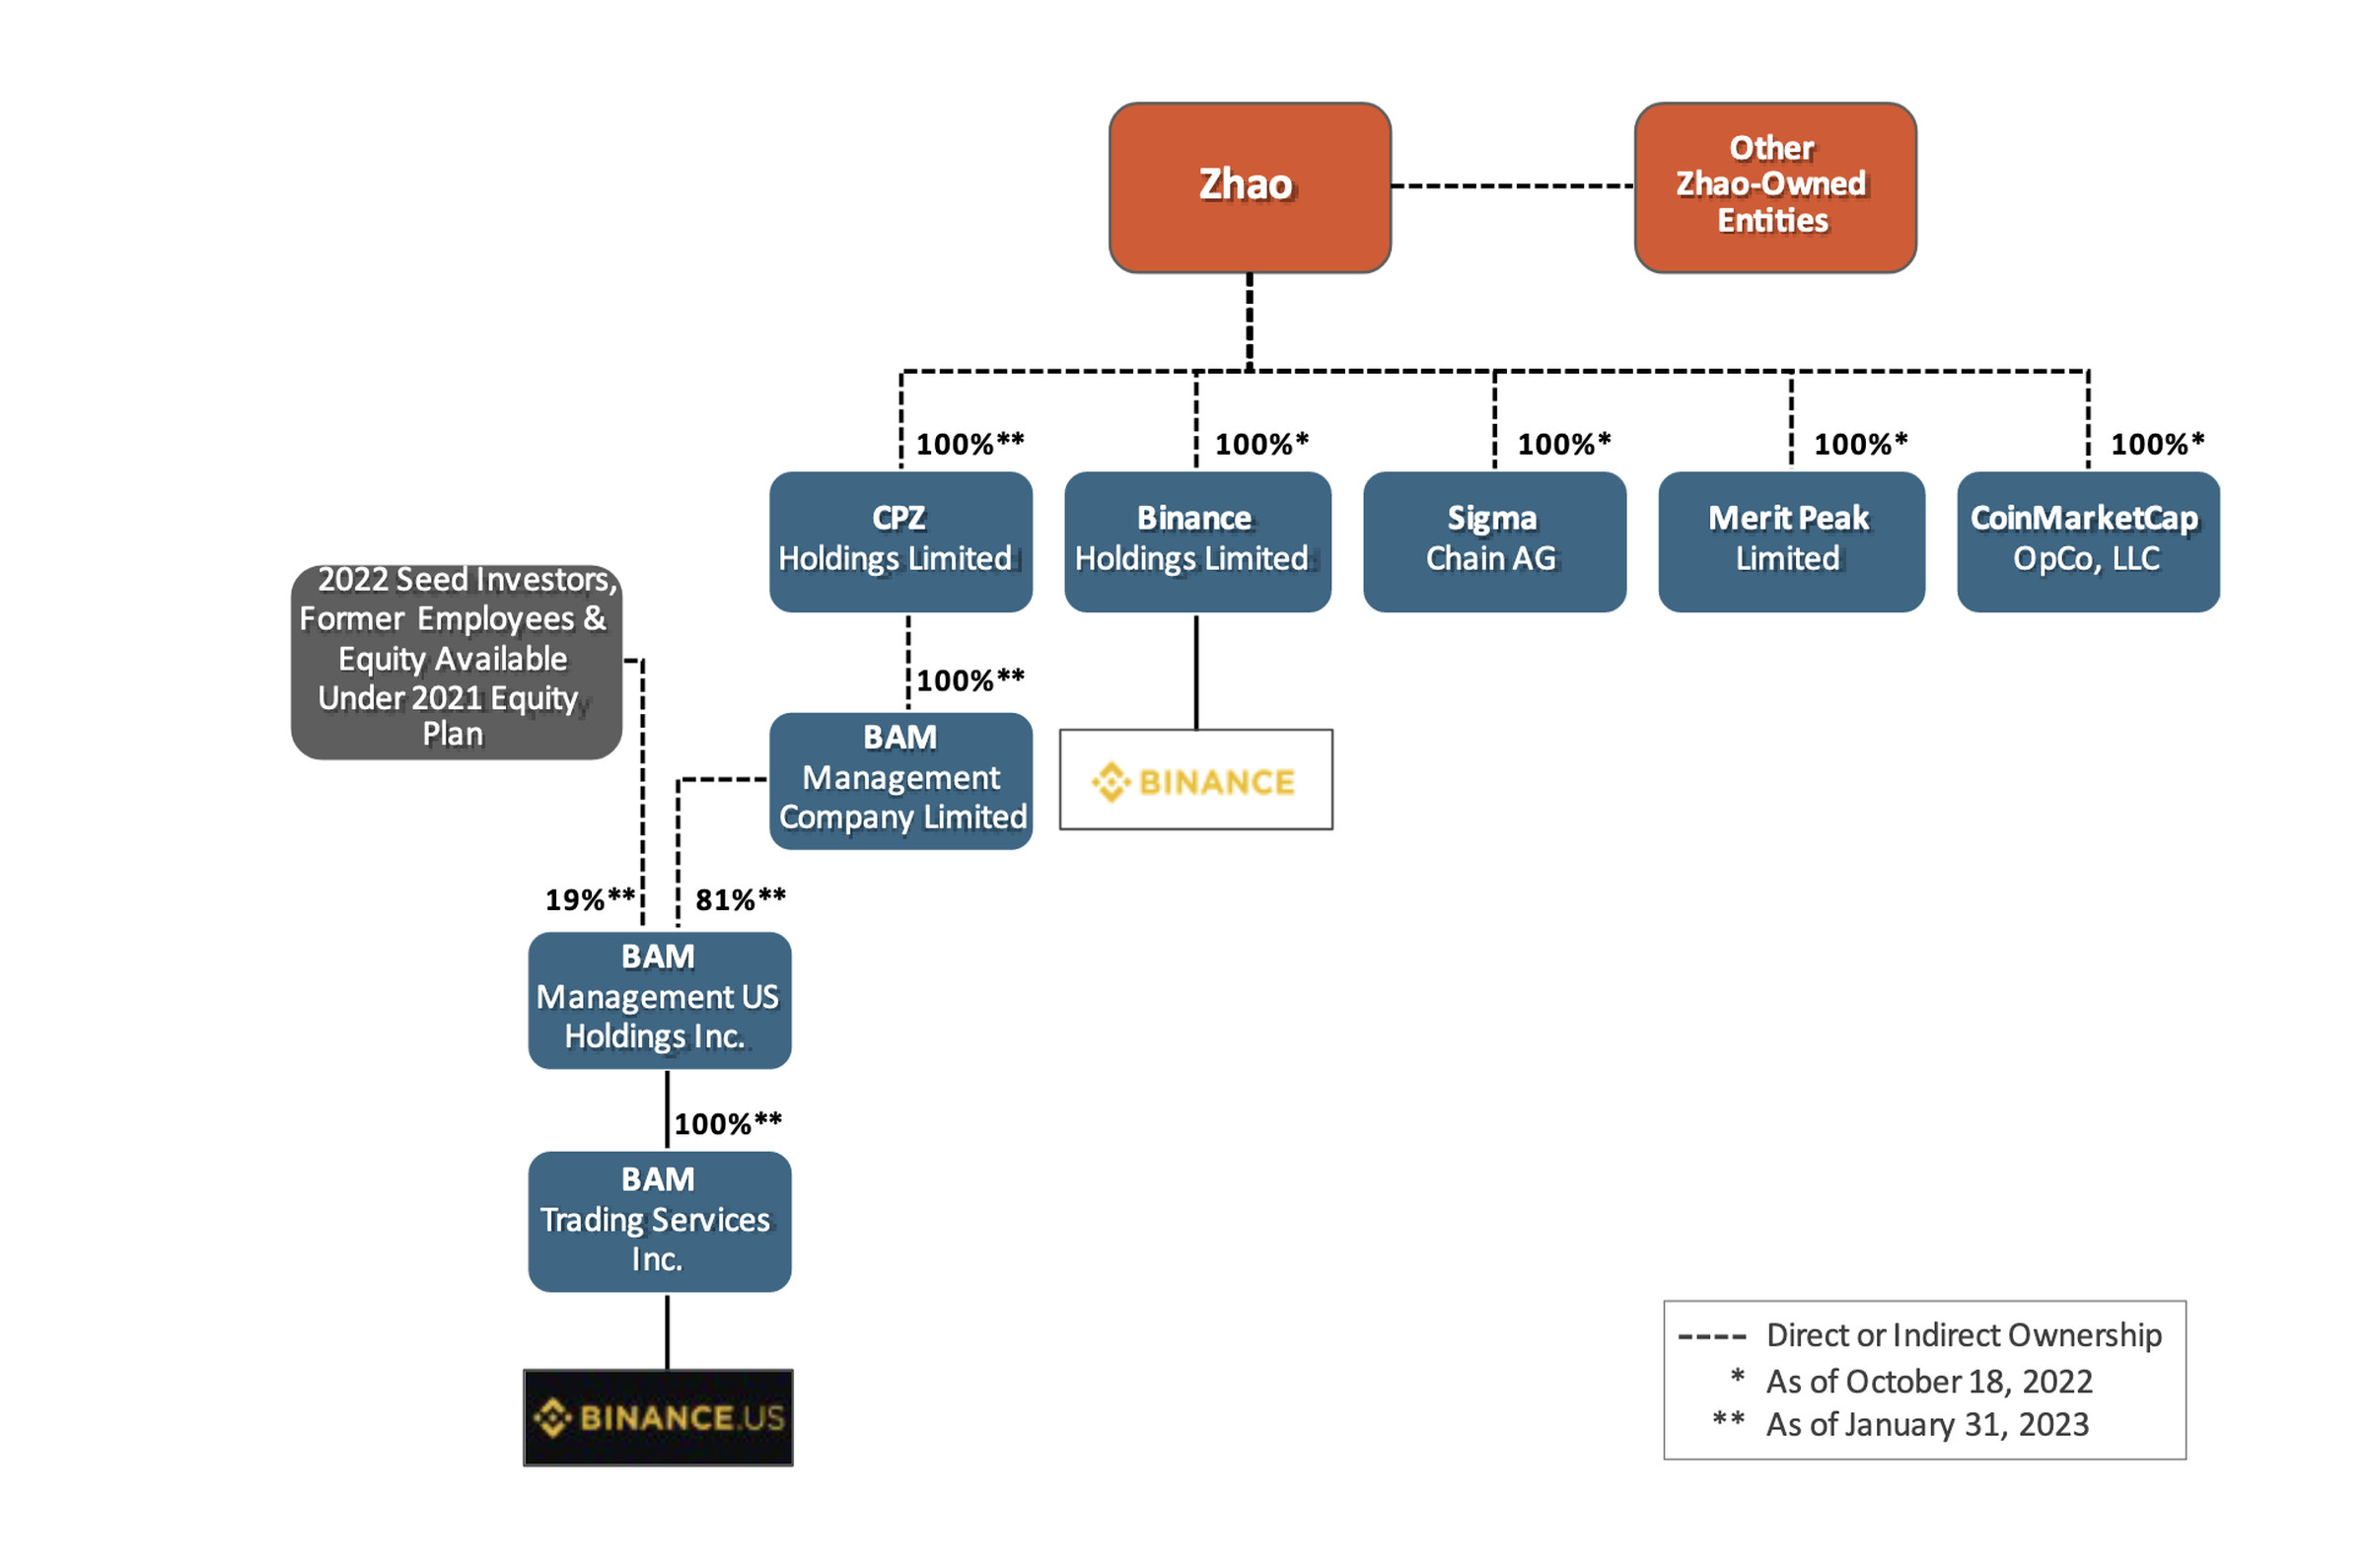 A flow chart showing that Zhao controlled: CPZ Holdings, Binance Holdings Limited, Sigma Chain AG, Merit Peak Limited, and Coin Market Cap. Nested under CPZ Holdings is BAM Management, a parent of Binance US.